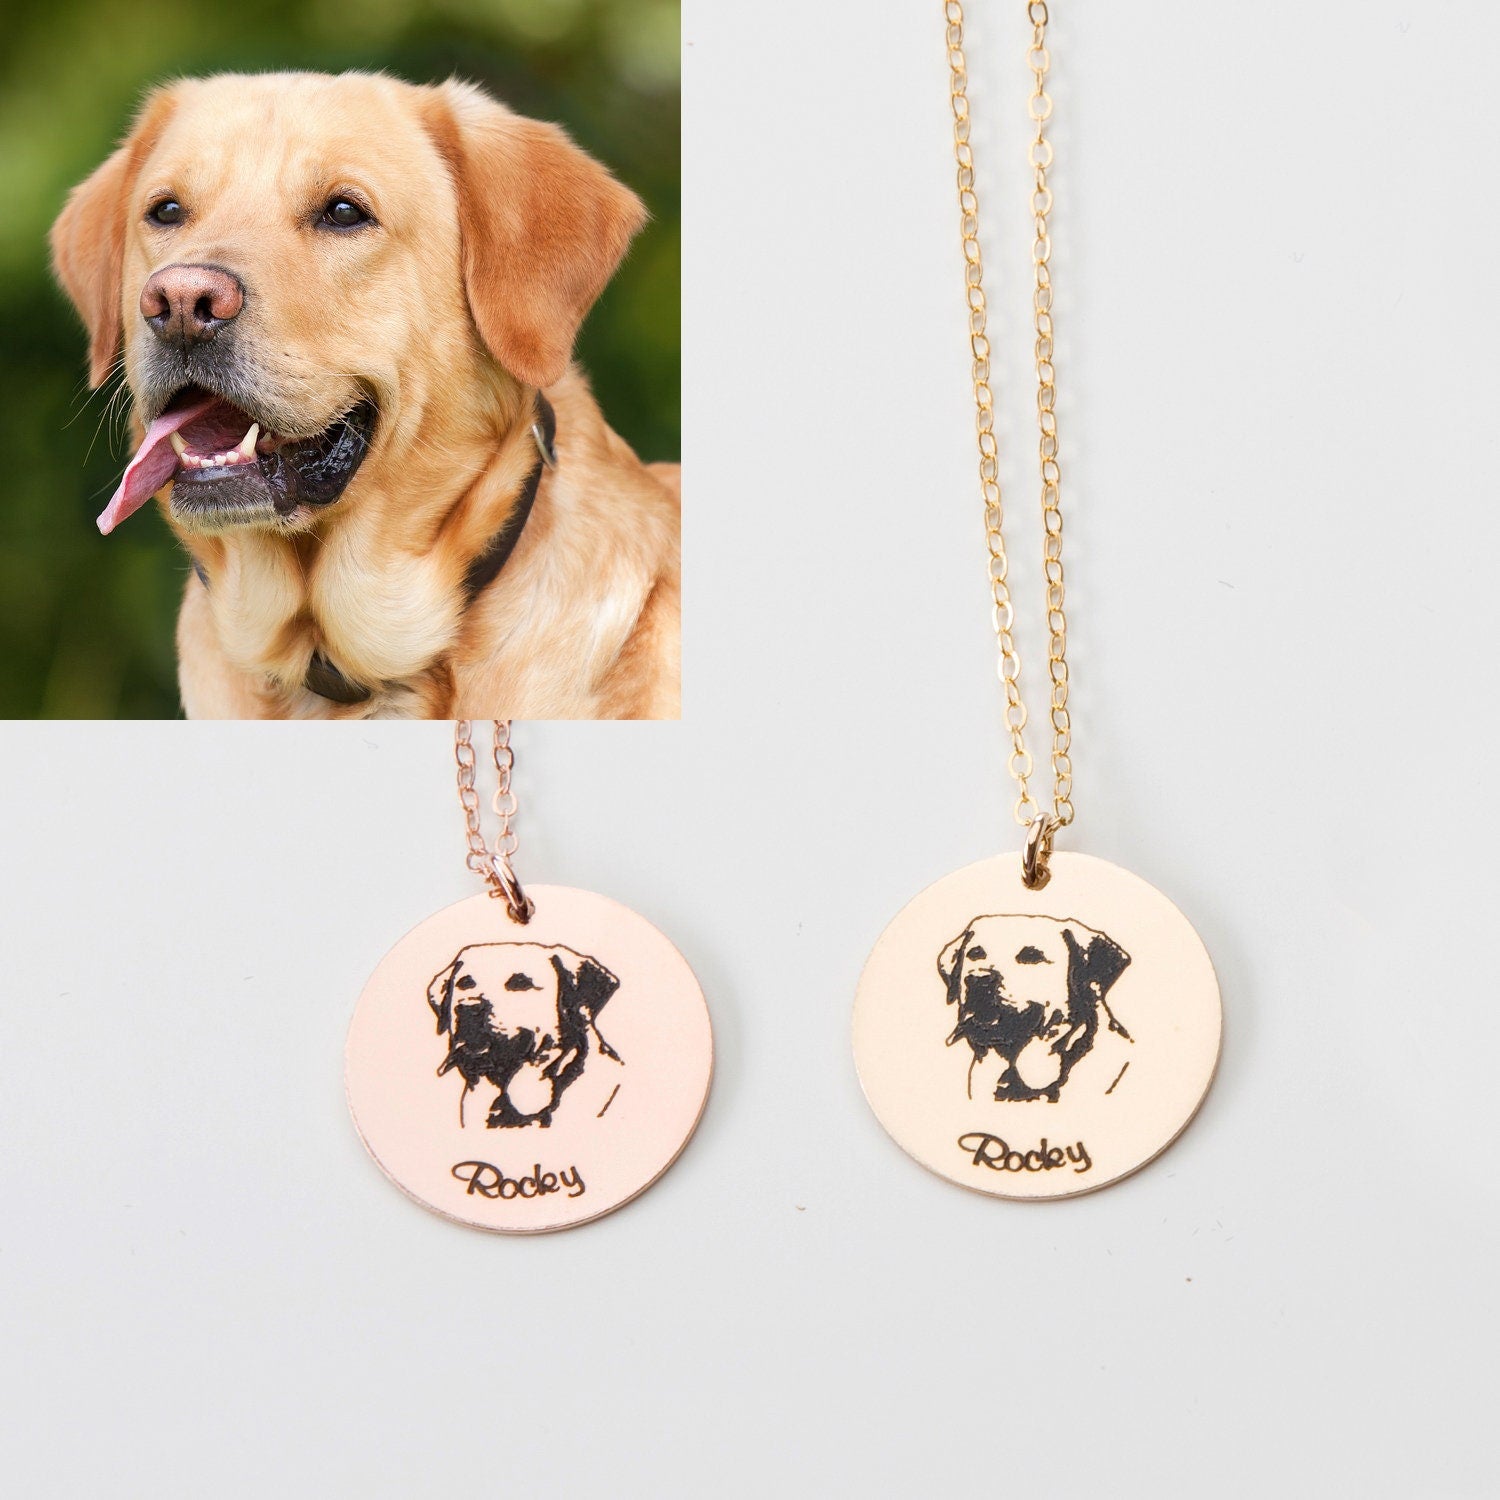 Walks Under Night's Sky Two Dogs Necklace with Golden Dog | Handma...